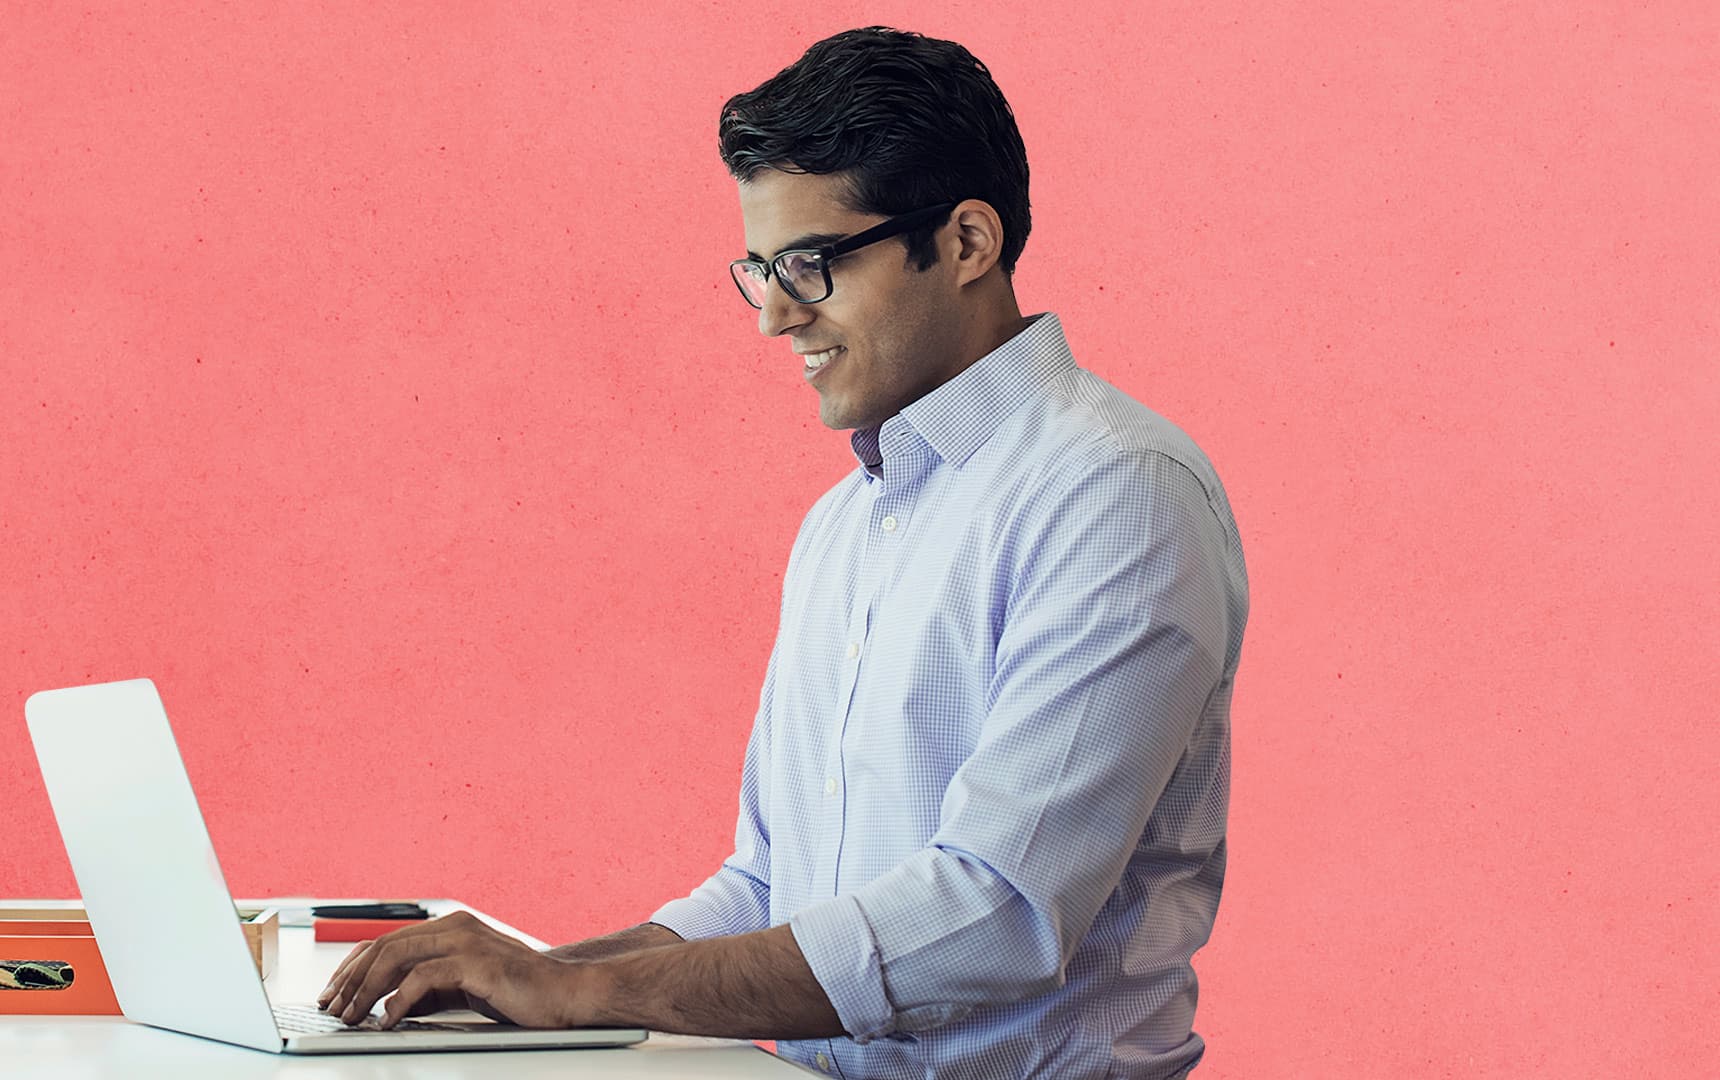 Man in glasses with pink background types on his laptop